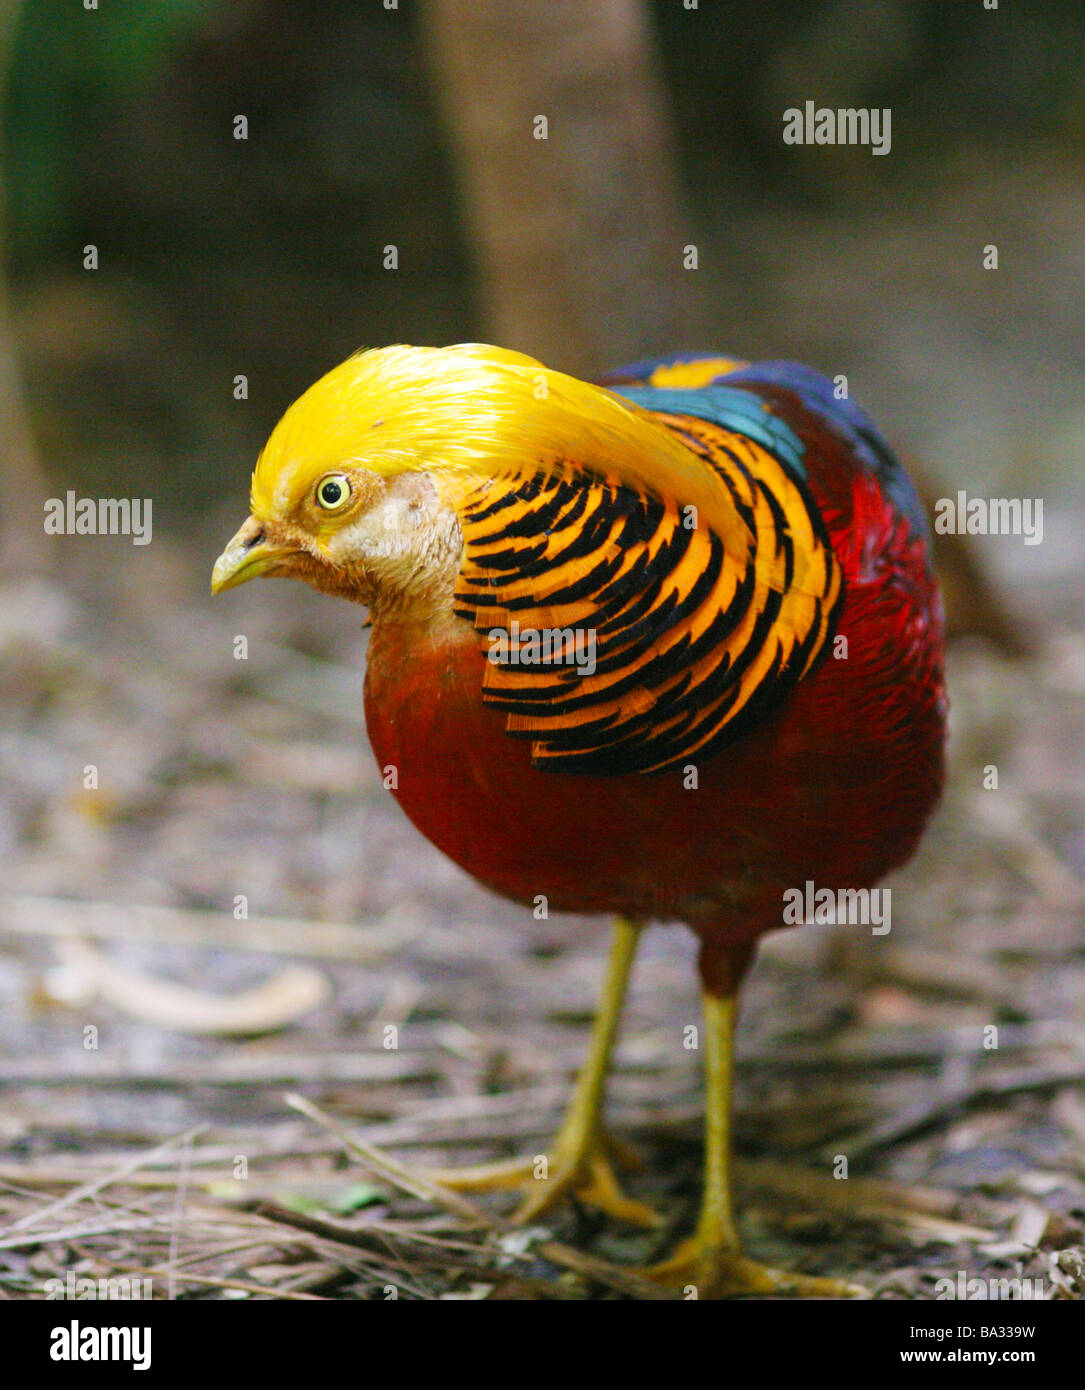 close up of the Golden Pheasant bird with multicolored feathers Stock Photo